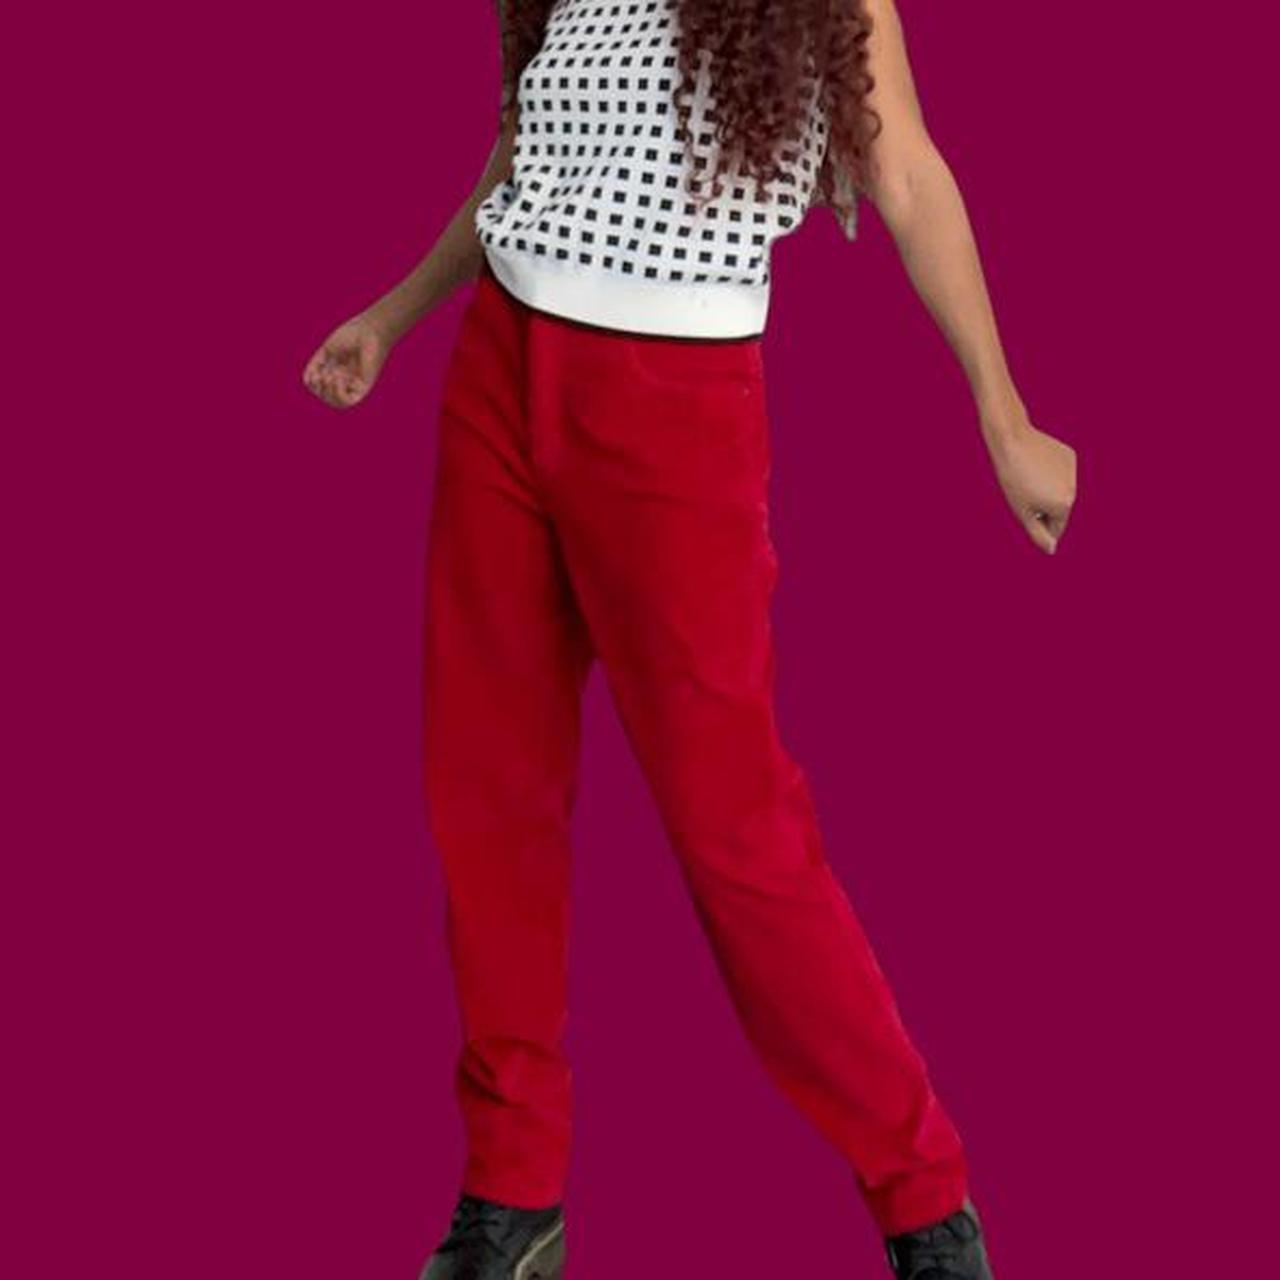 Product Image 2 - Bill blass red corduroy jeans
Stretch